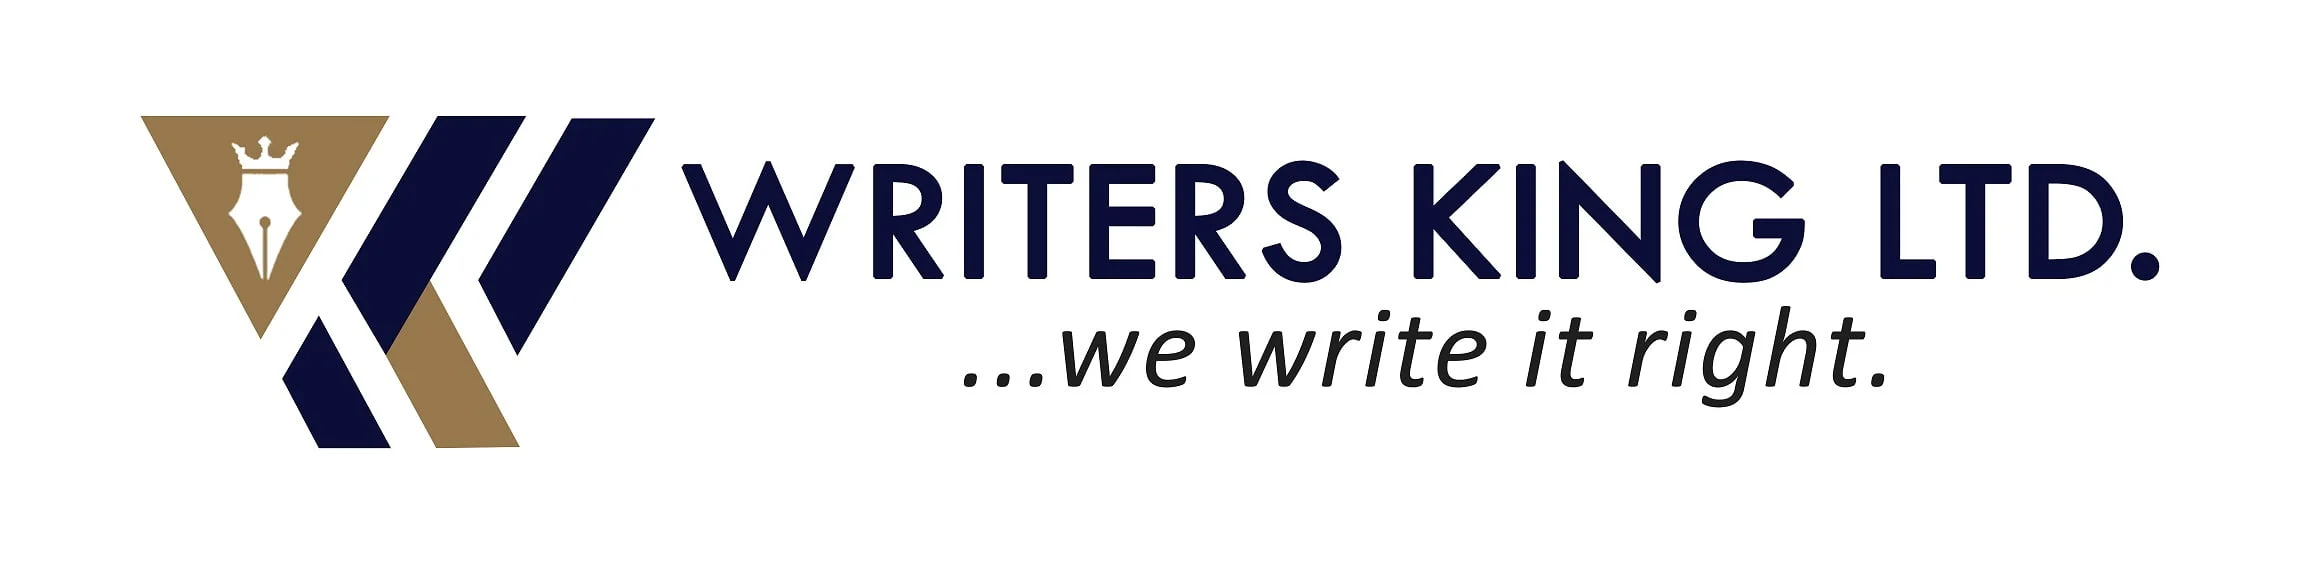 Professional Content Writing Services | Writers King LTD